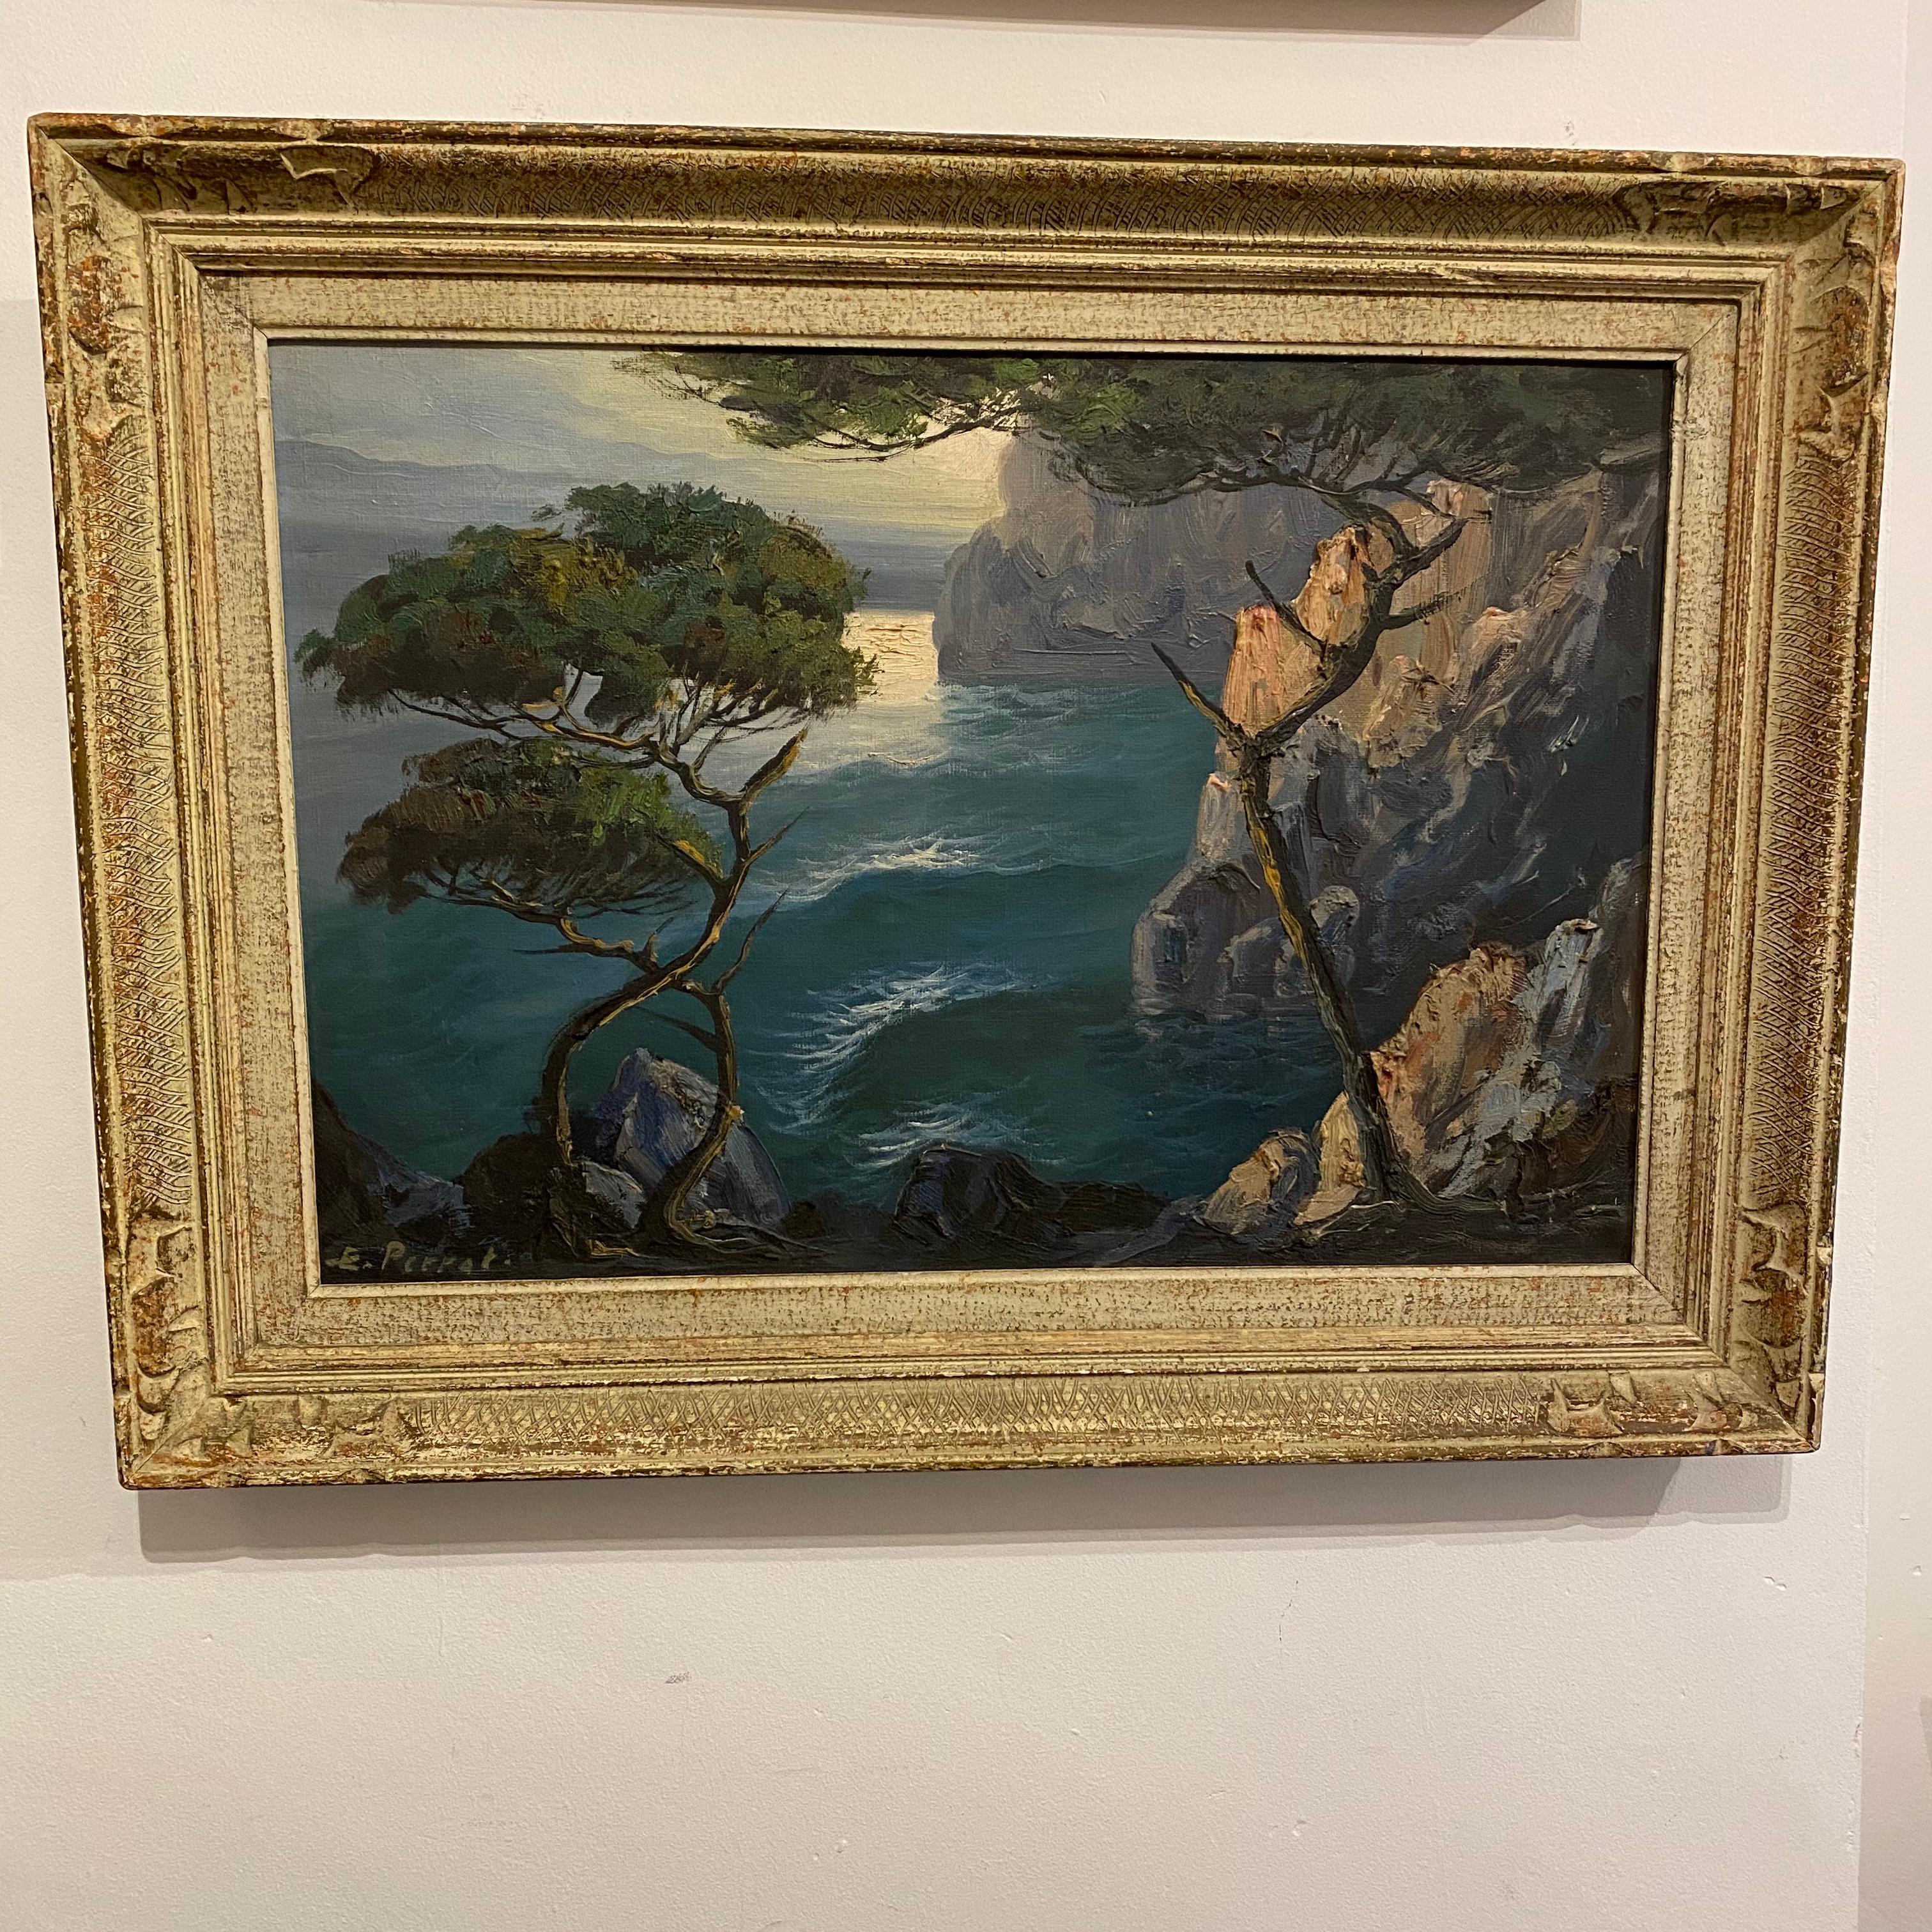 A nicely compiled moonlit coastal landscape. Oil on canvas with good colors and nicely framed. Highly decorative. Signed E Perrat/Perret, maybe Edouard Perret? We love the trees in the foreground, the rock formation and the moon dappled